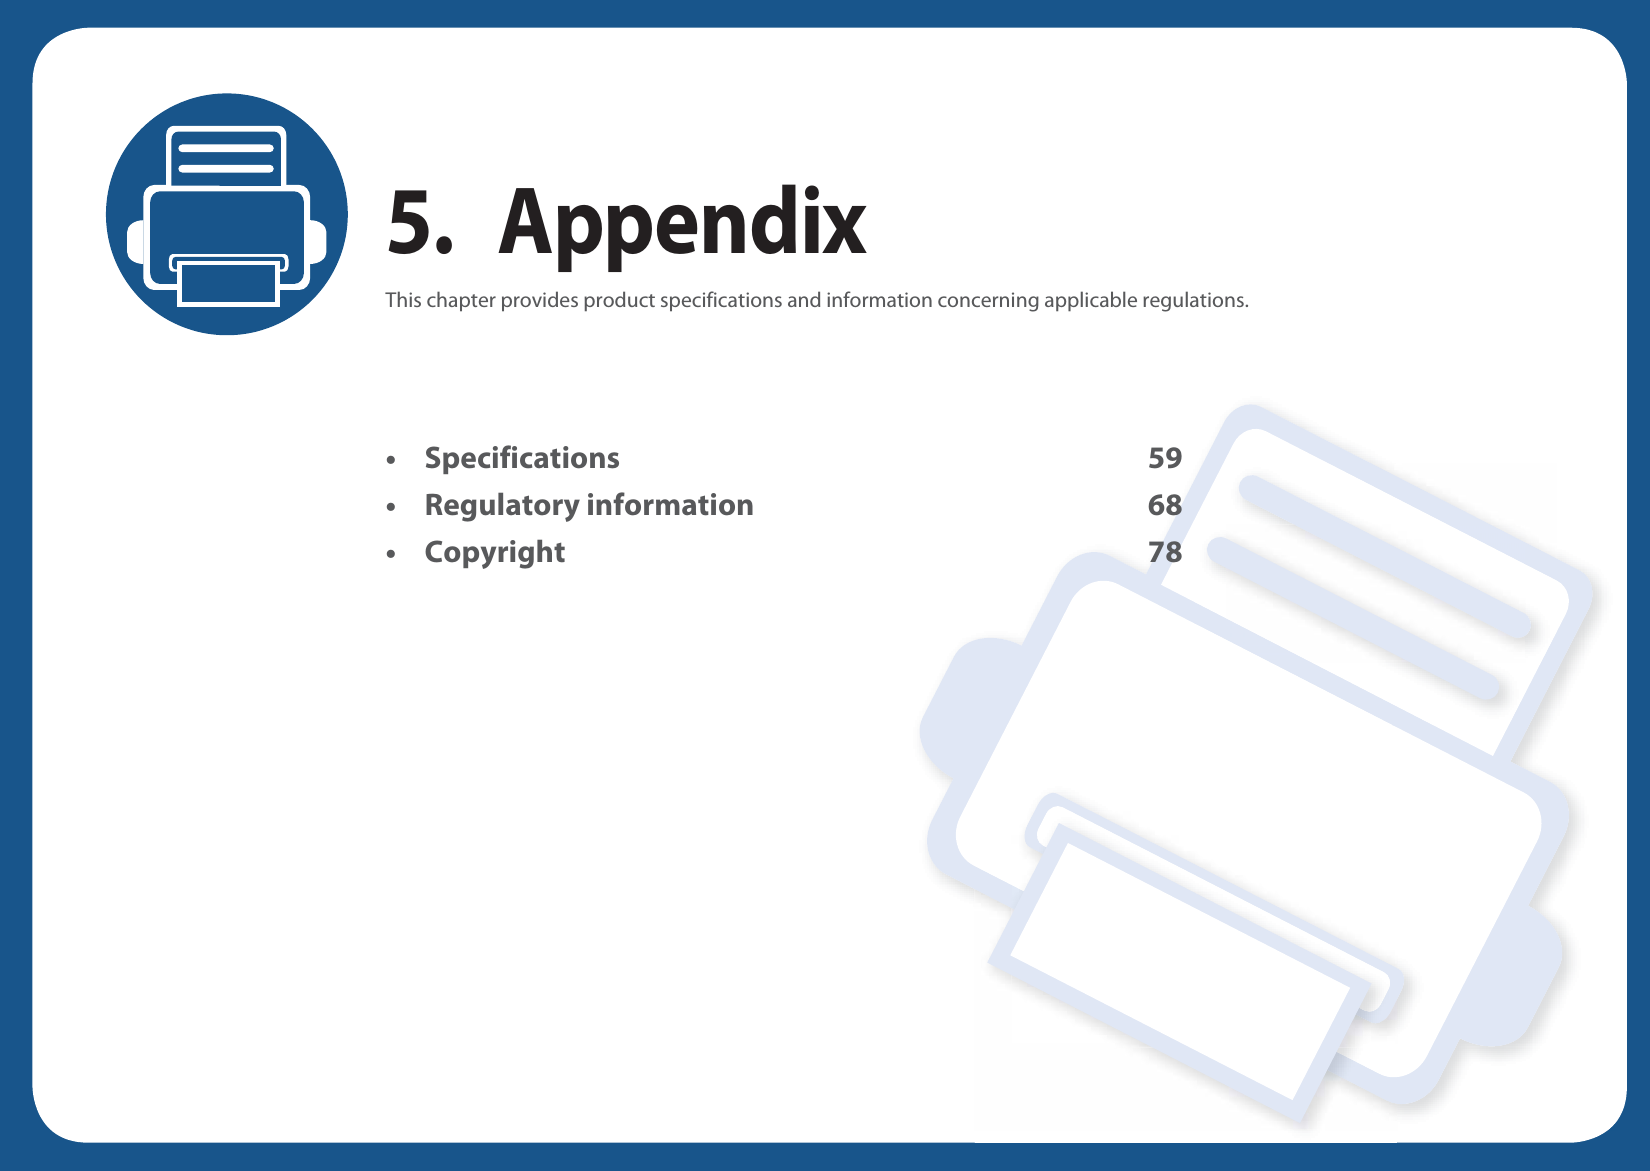 5. AppendixThis chapter provides product specifications and information concerning applicable regulations.• Specifications 59• Regulatory information 68• Copyright 78